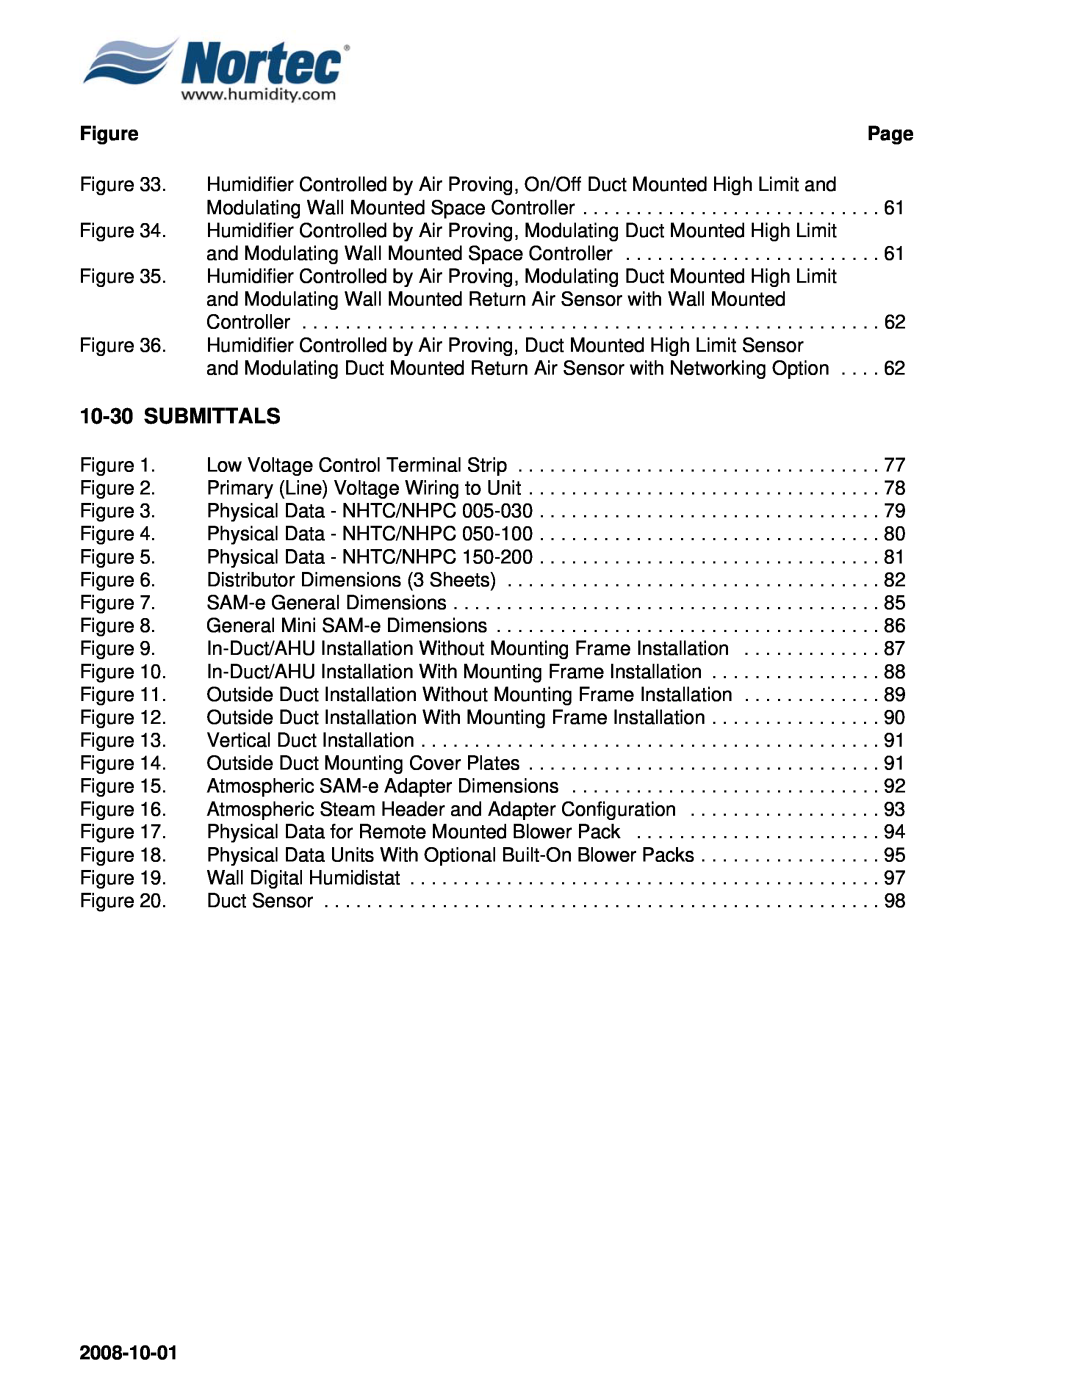 Nortec NHPC, NHTC manual 10-30SUBMITTALS, Figure, 2008-10-01 